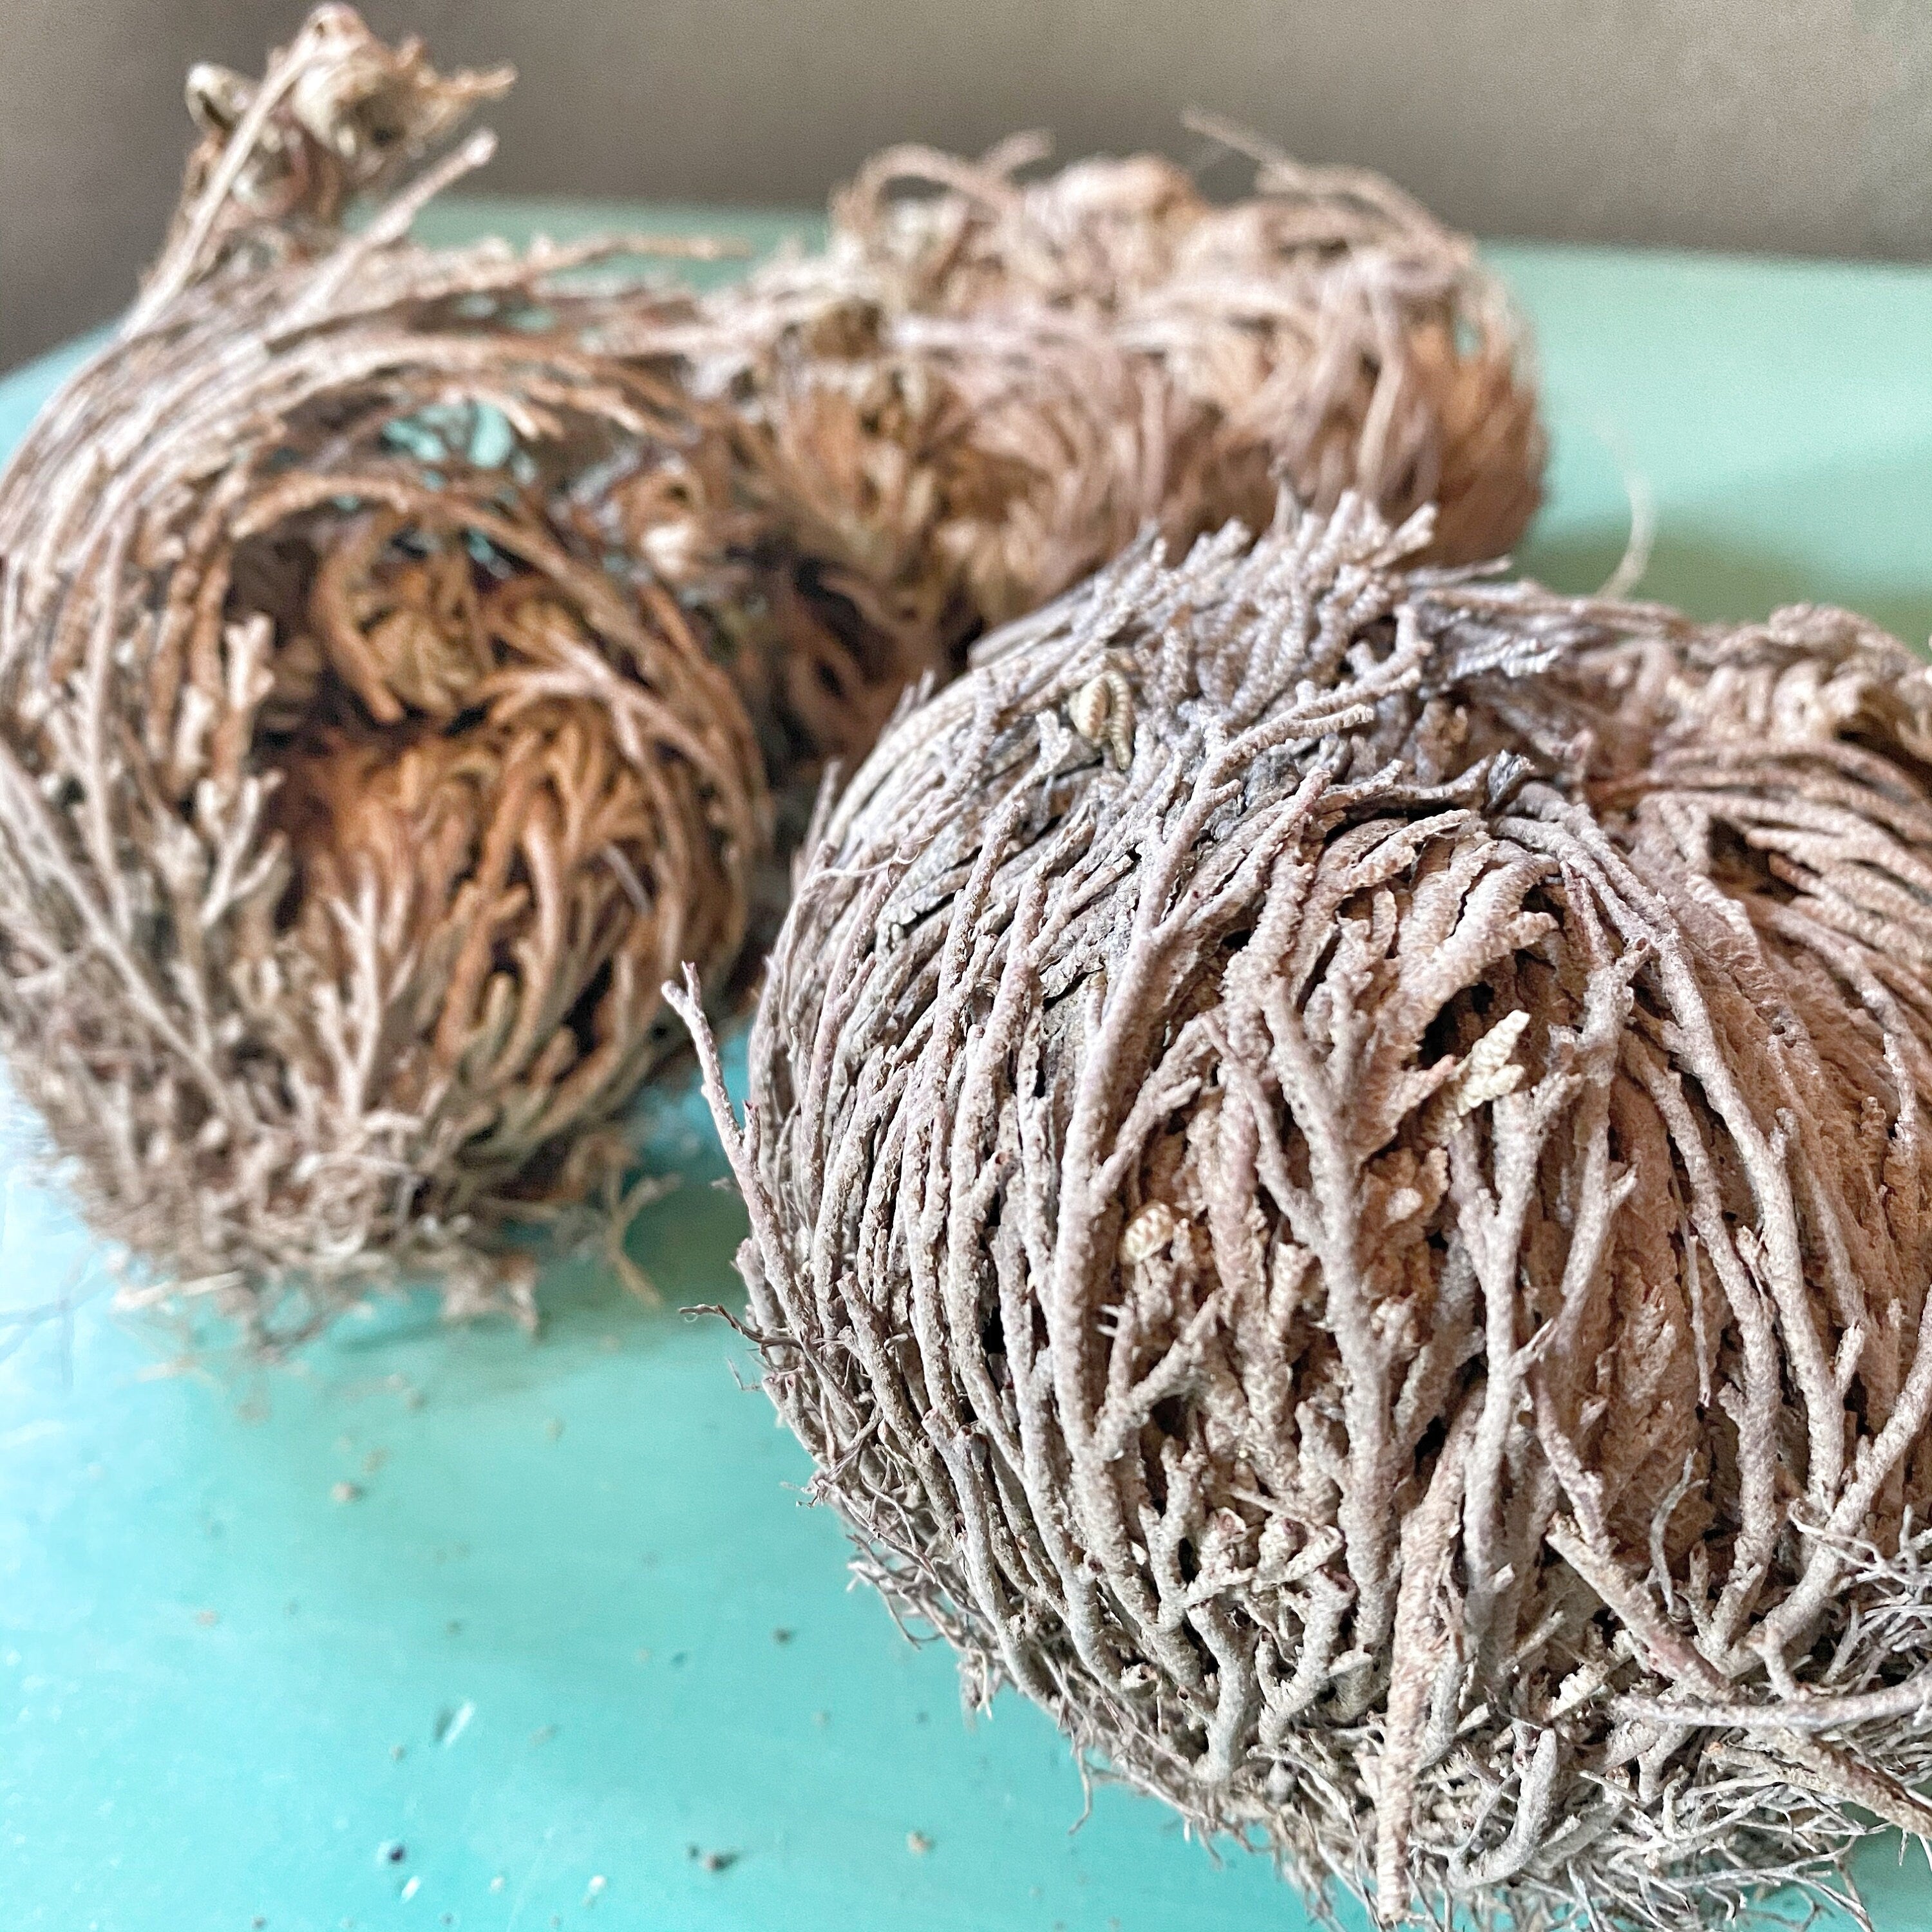 Dried Rose of Jericho, also known as the Resurrection Plant, sits on a teal surface, exemplifying the unique plant&